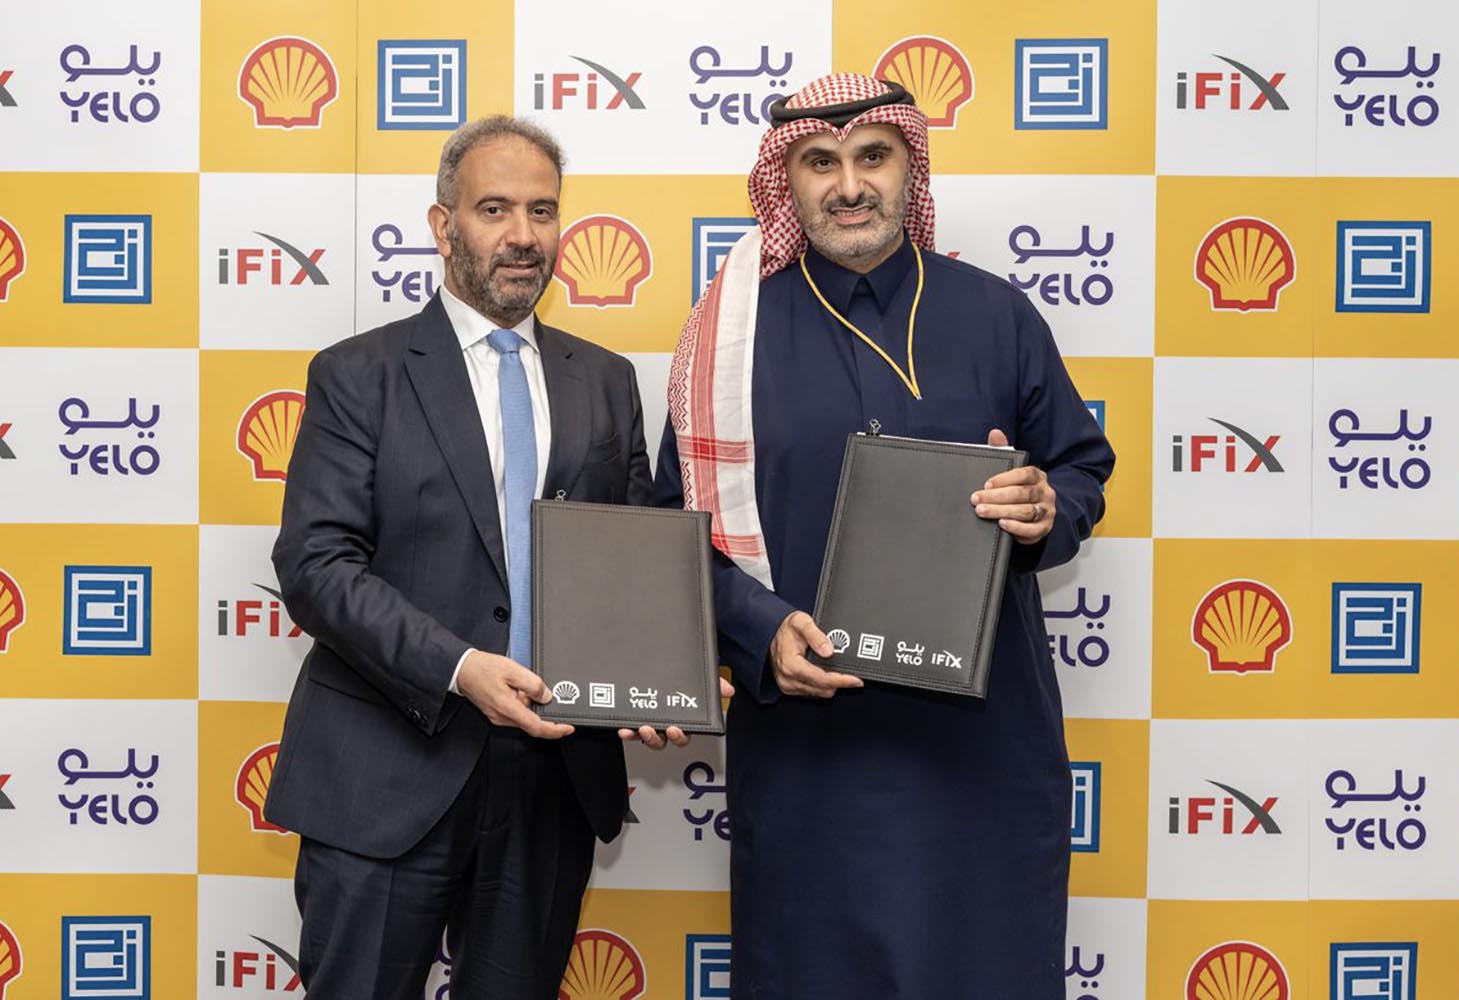 JOSLOC to supply "Yelo" maintenance centers with Shell lubricants